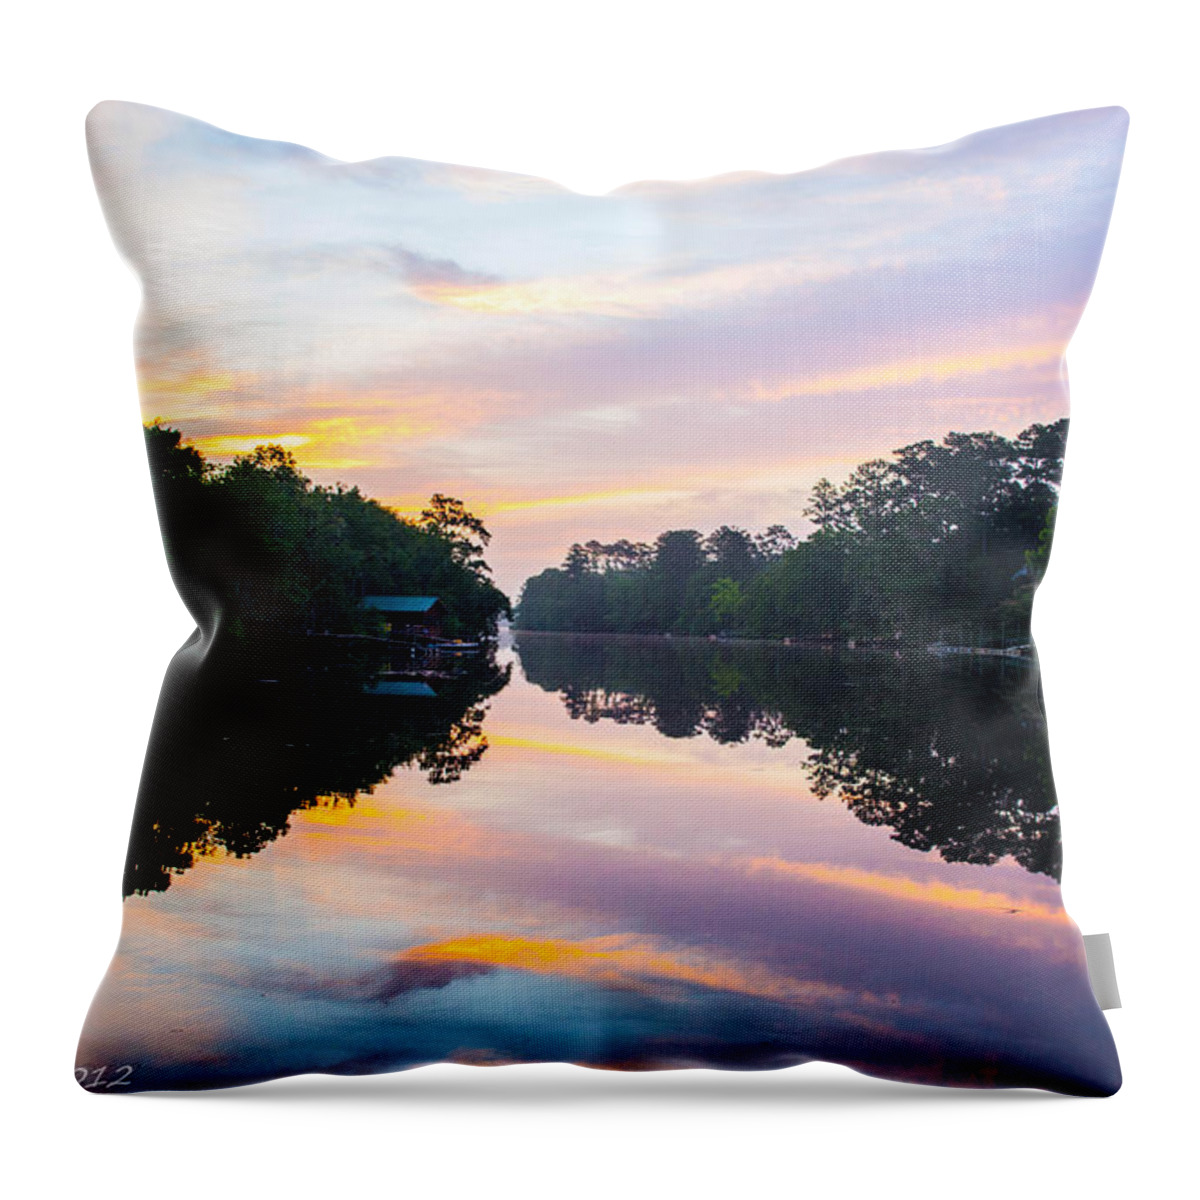 Reflections Throw Pillow featuring the photograph Good Morning by Shannon Harrington